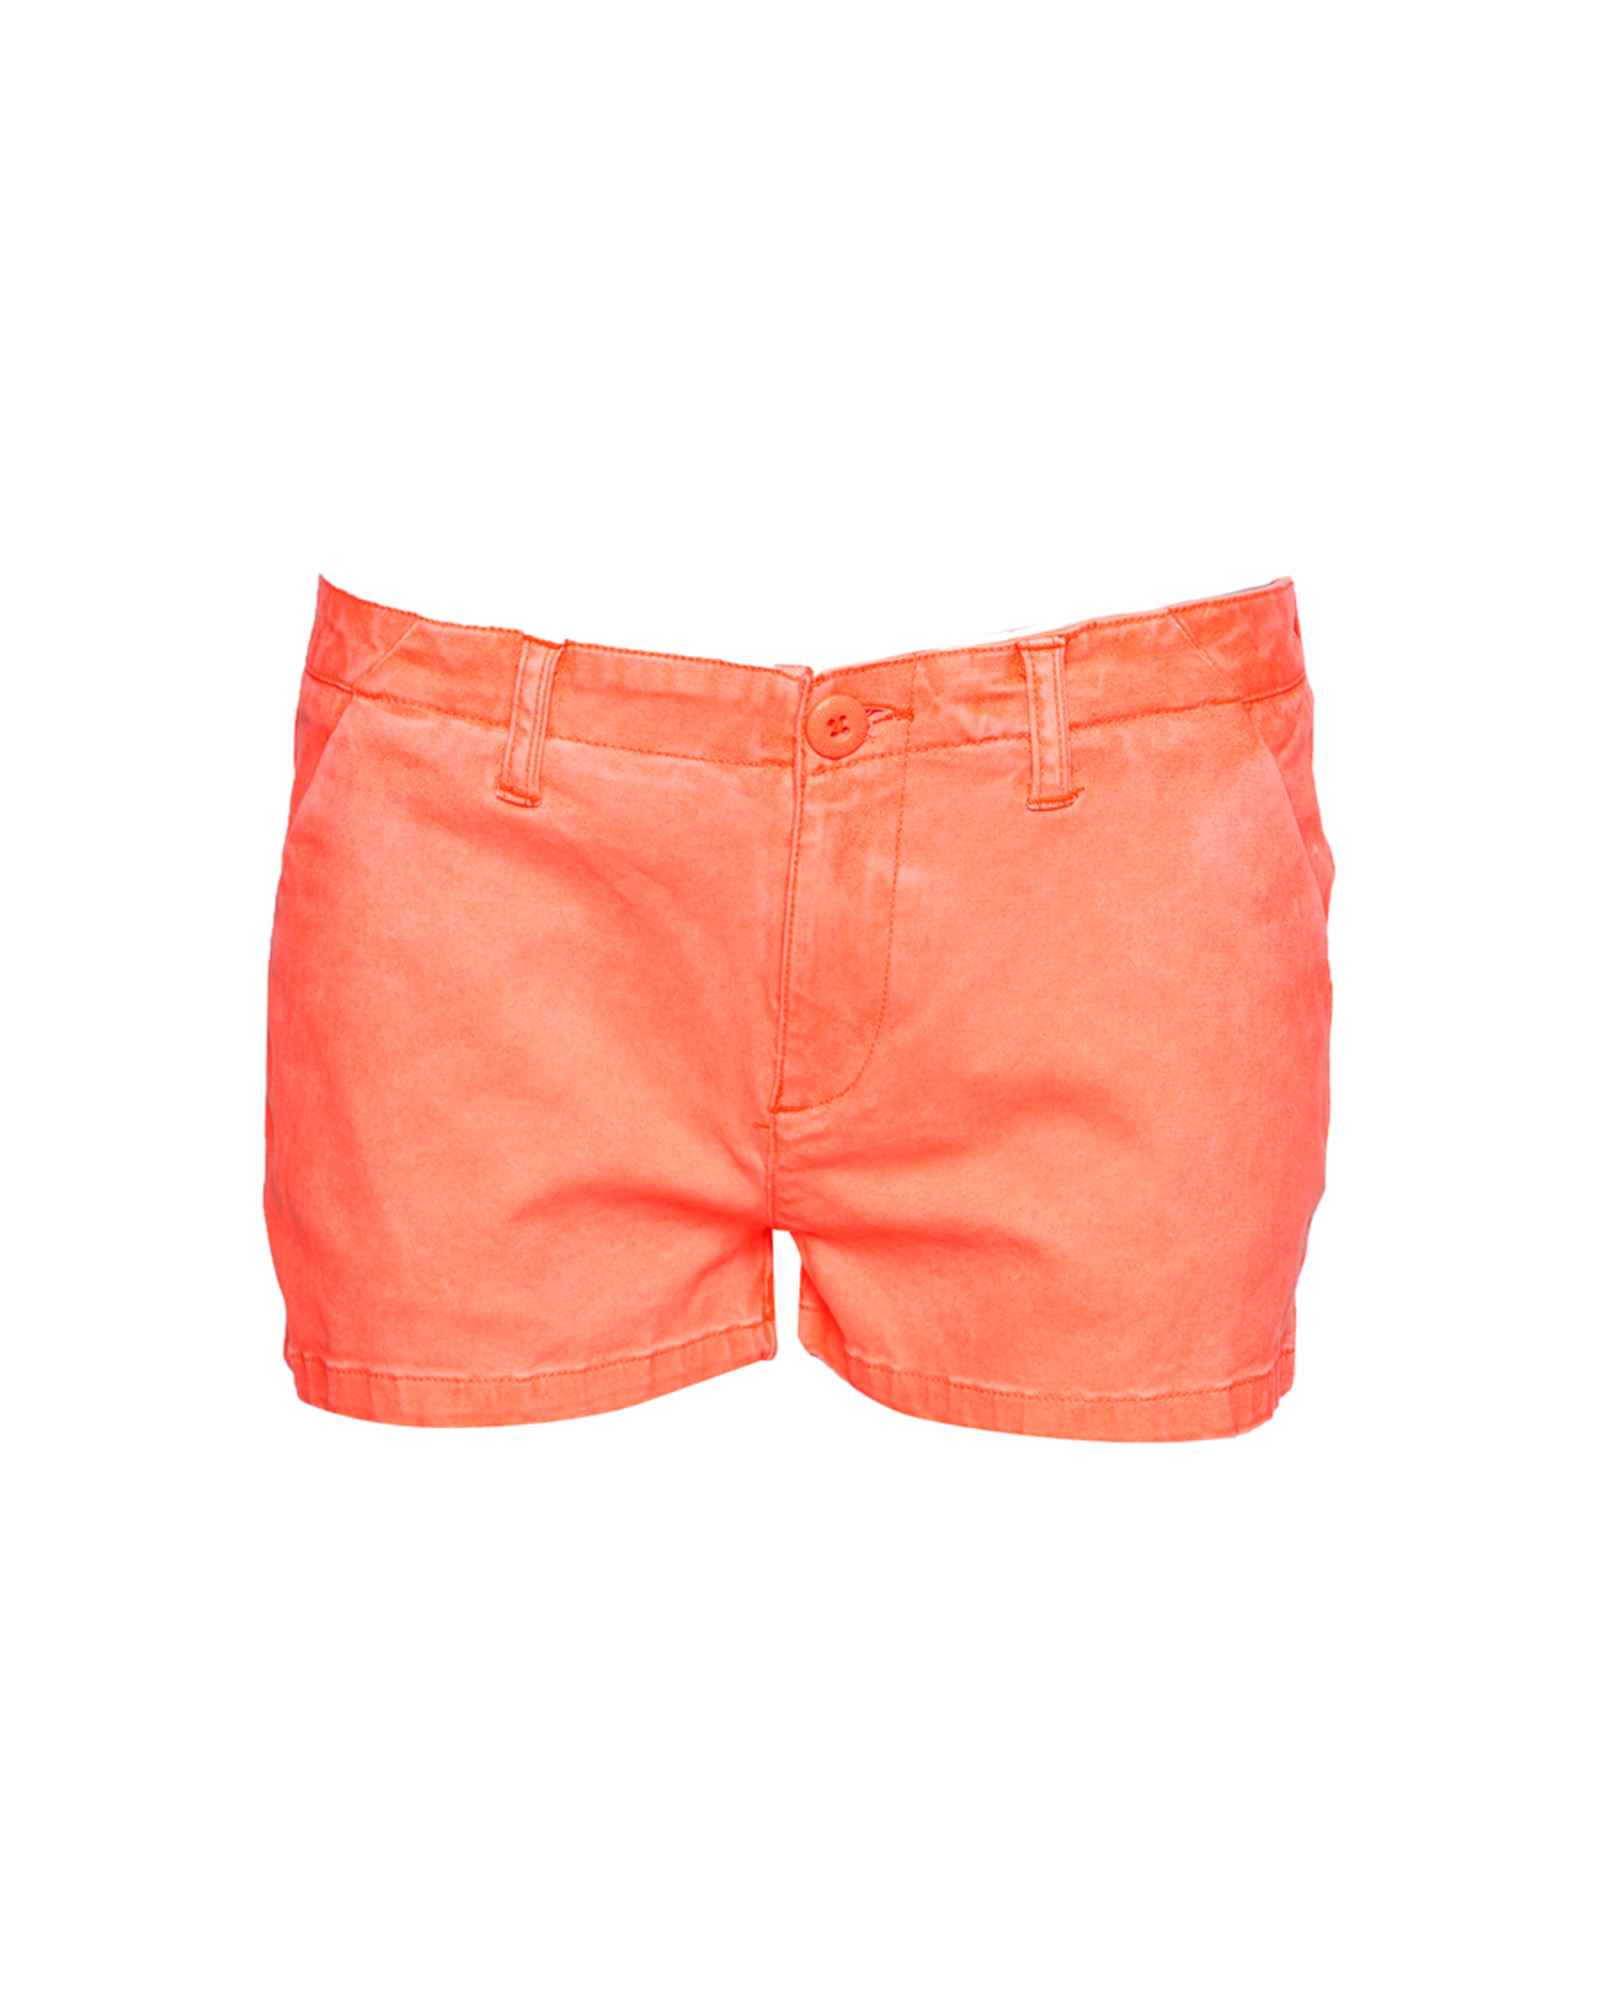 Superdry Womens Chino Hot Shorts Size 14 for sale online